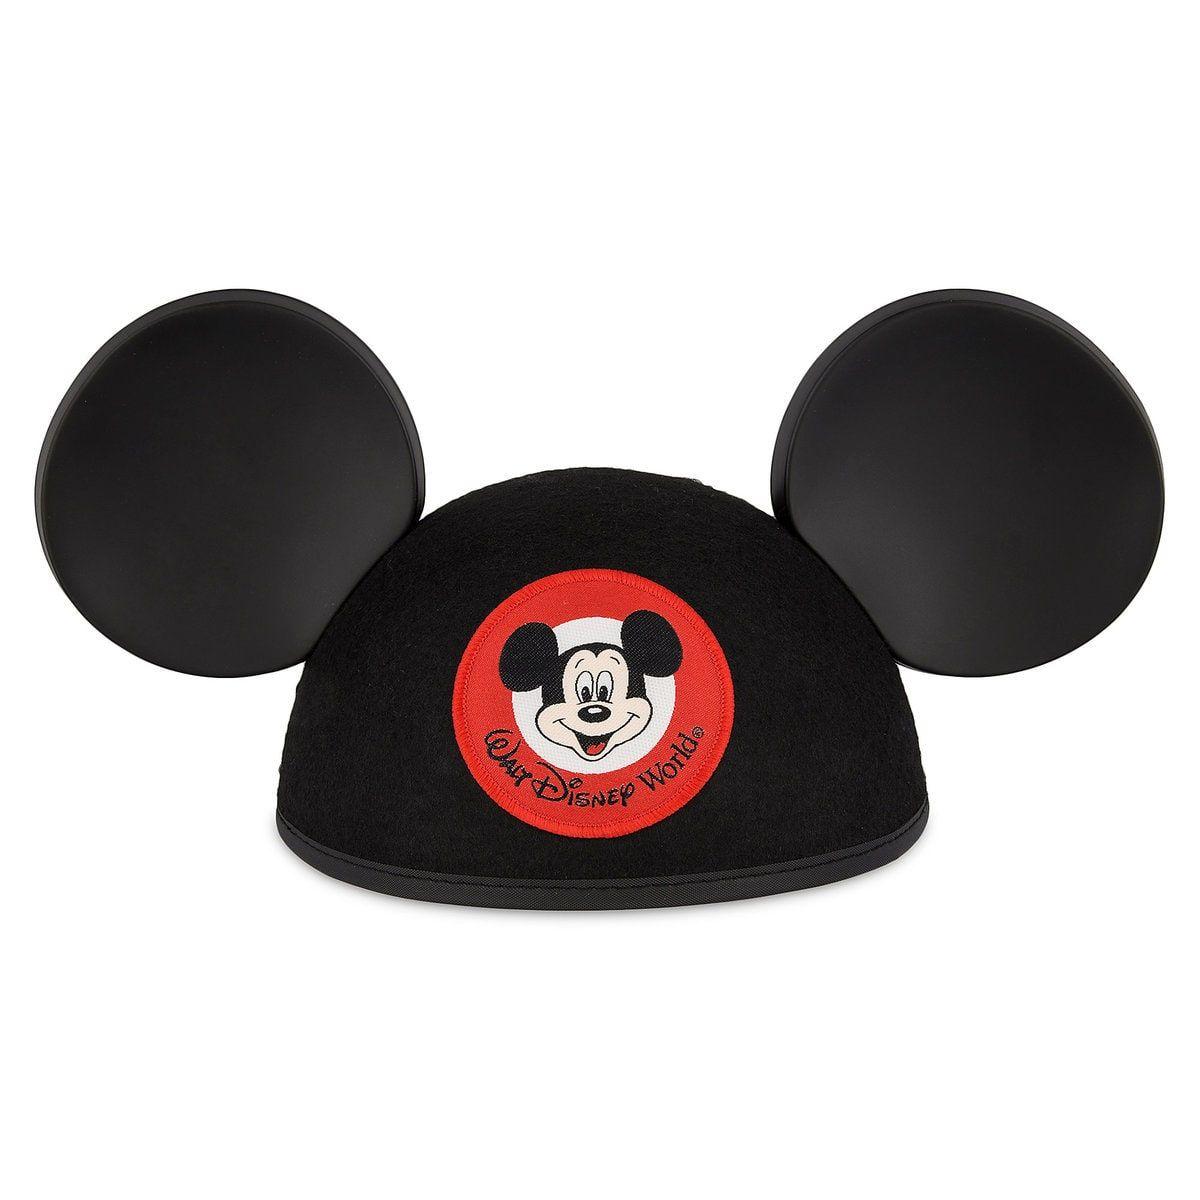 Mouseketeer Logo - Mouseketeer Ear Hat for Adults Mickey Mouse Club Disney World